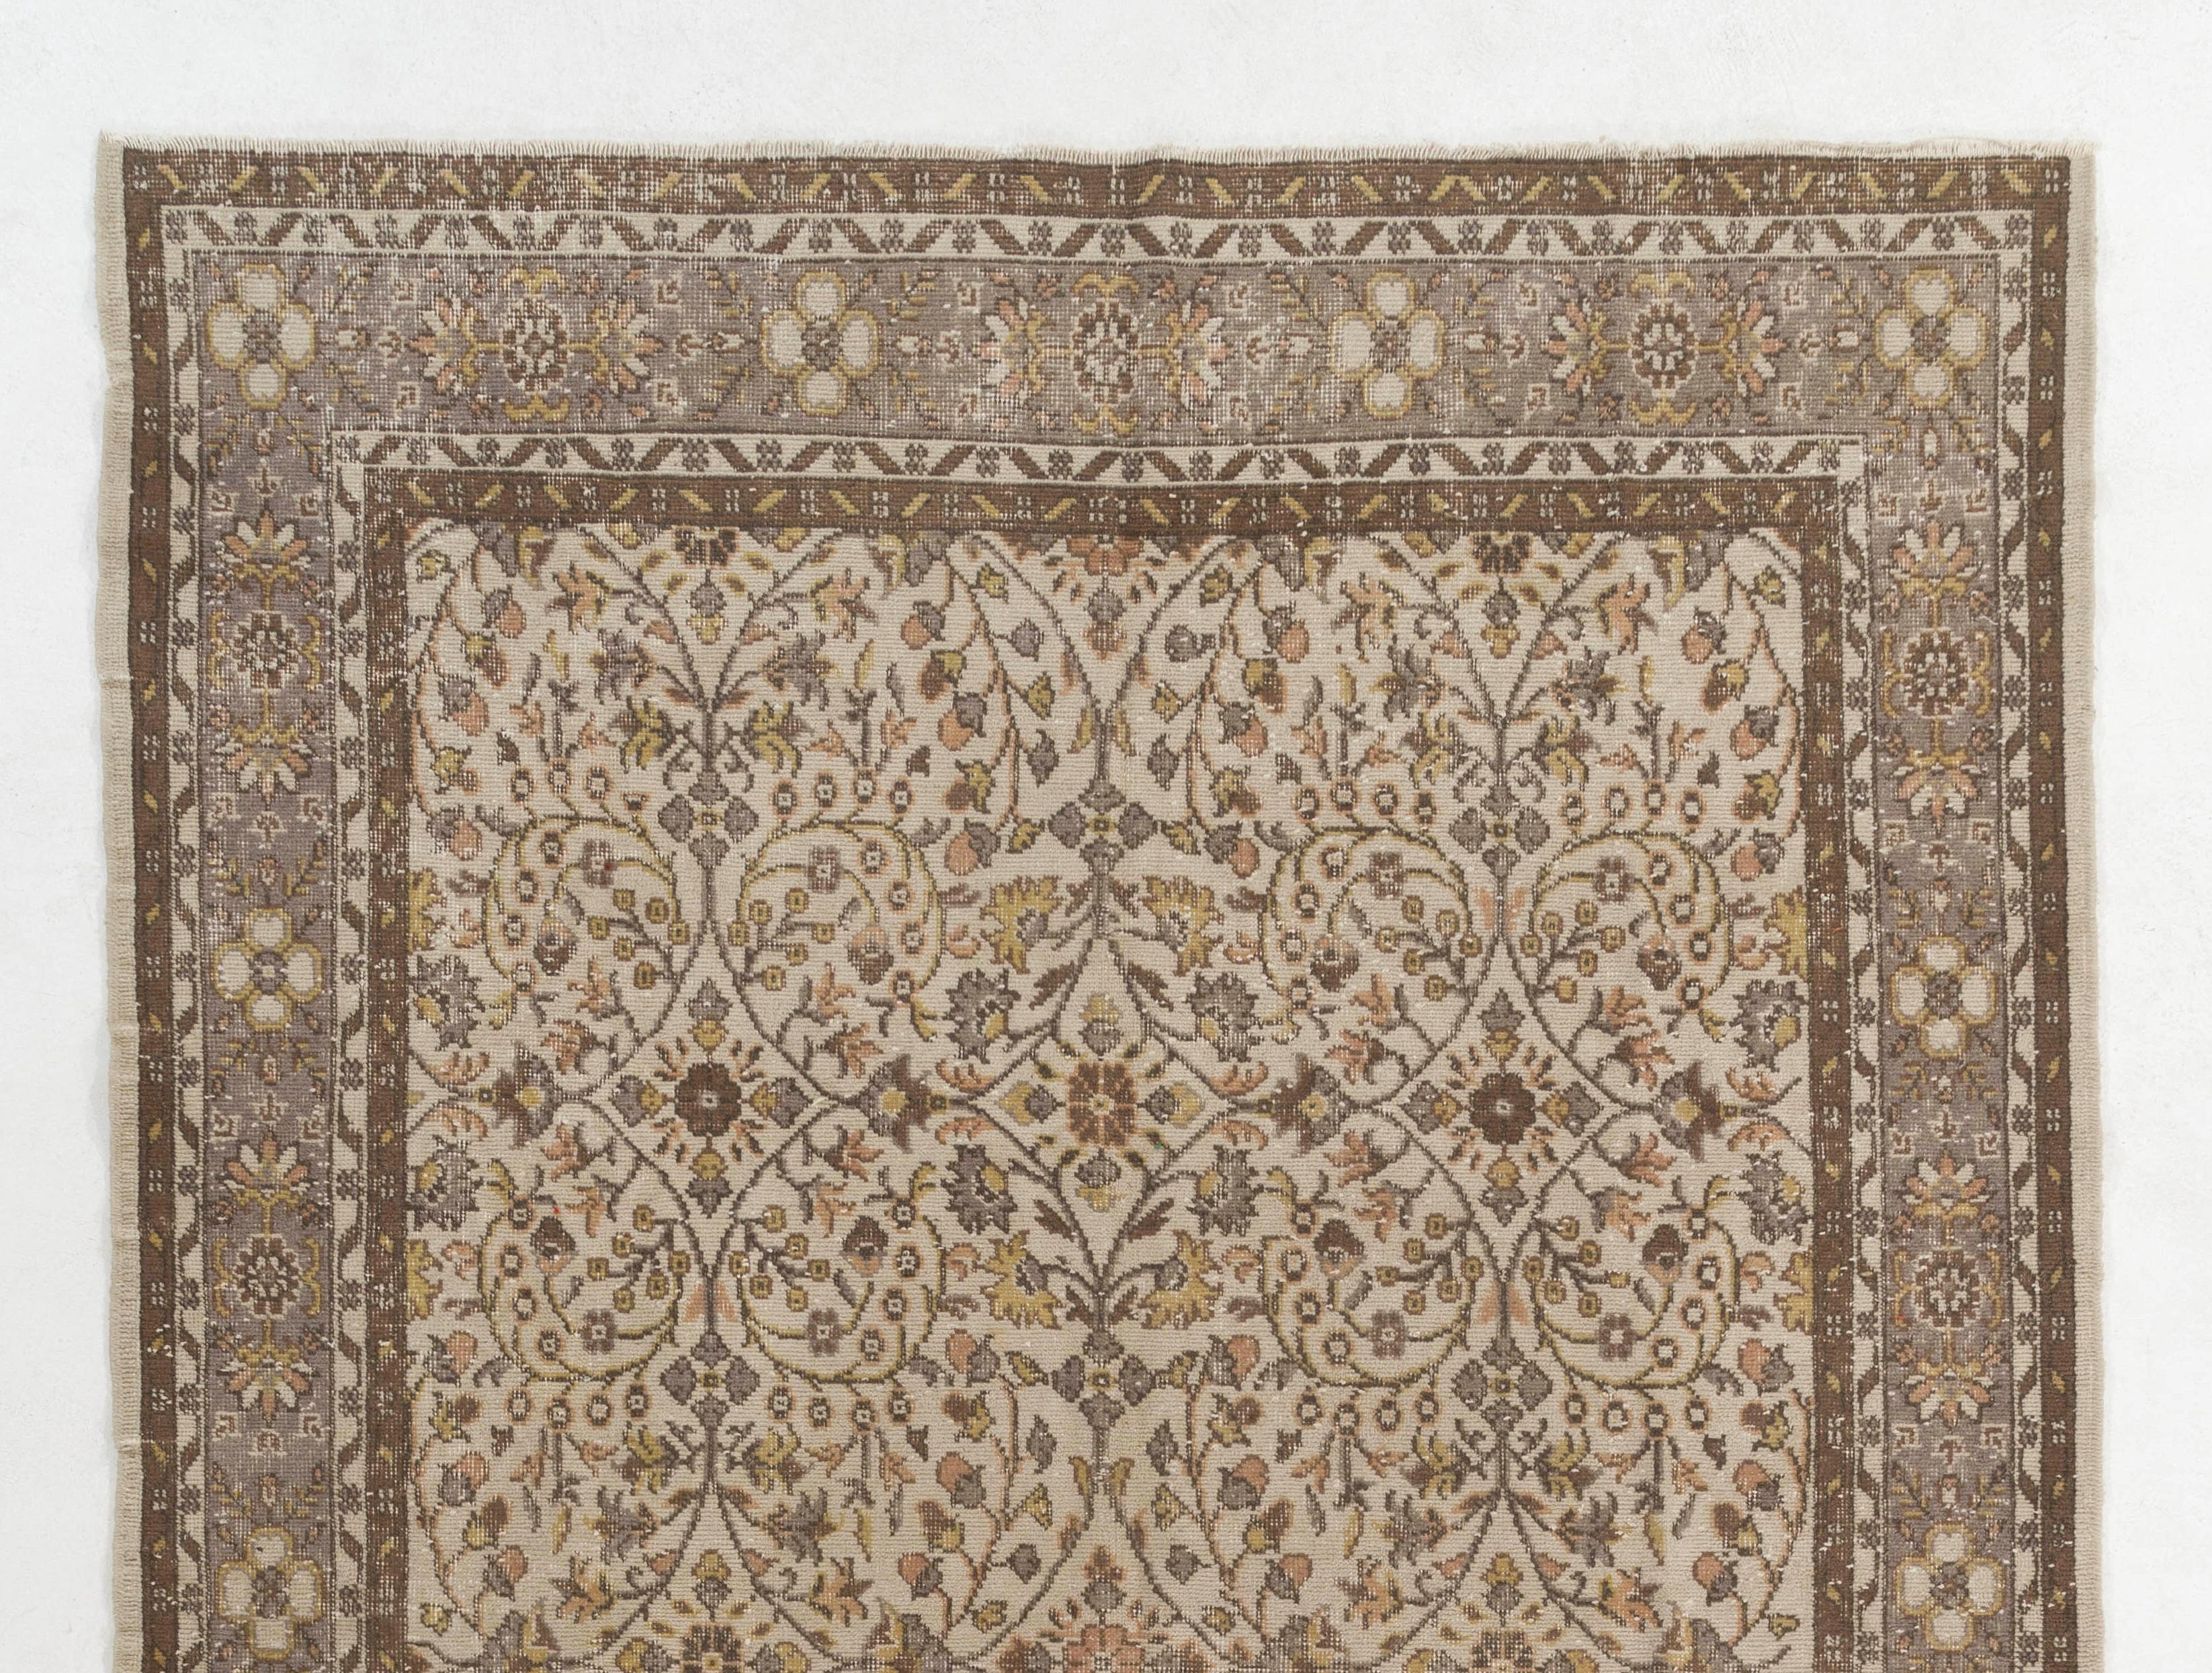 Vintage handmade sun-faded rugs are a type of traditional textile that have been woven by hand using natural fibers such as wool or cotton. These rugs were typically made in regions with sunny climates, where they were hung outside to dry after